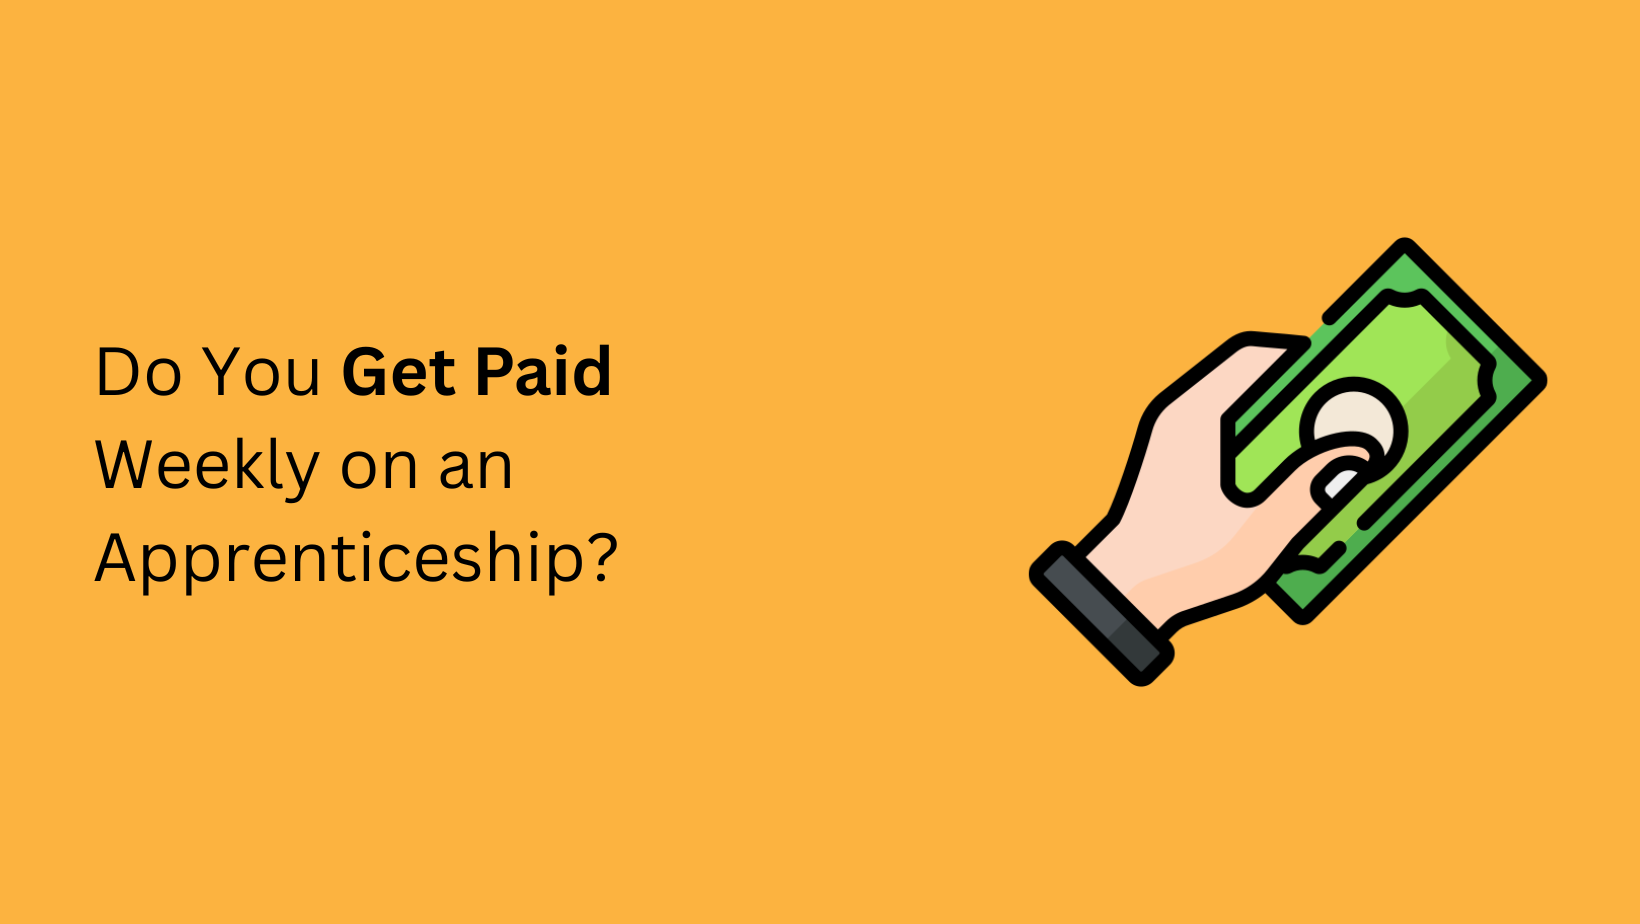 Do You Get Paid Weekly on an Apprenticeship